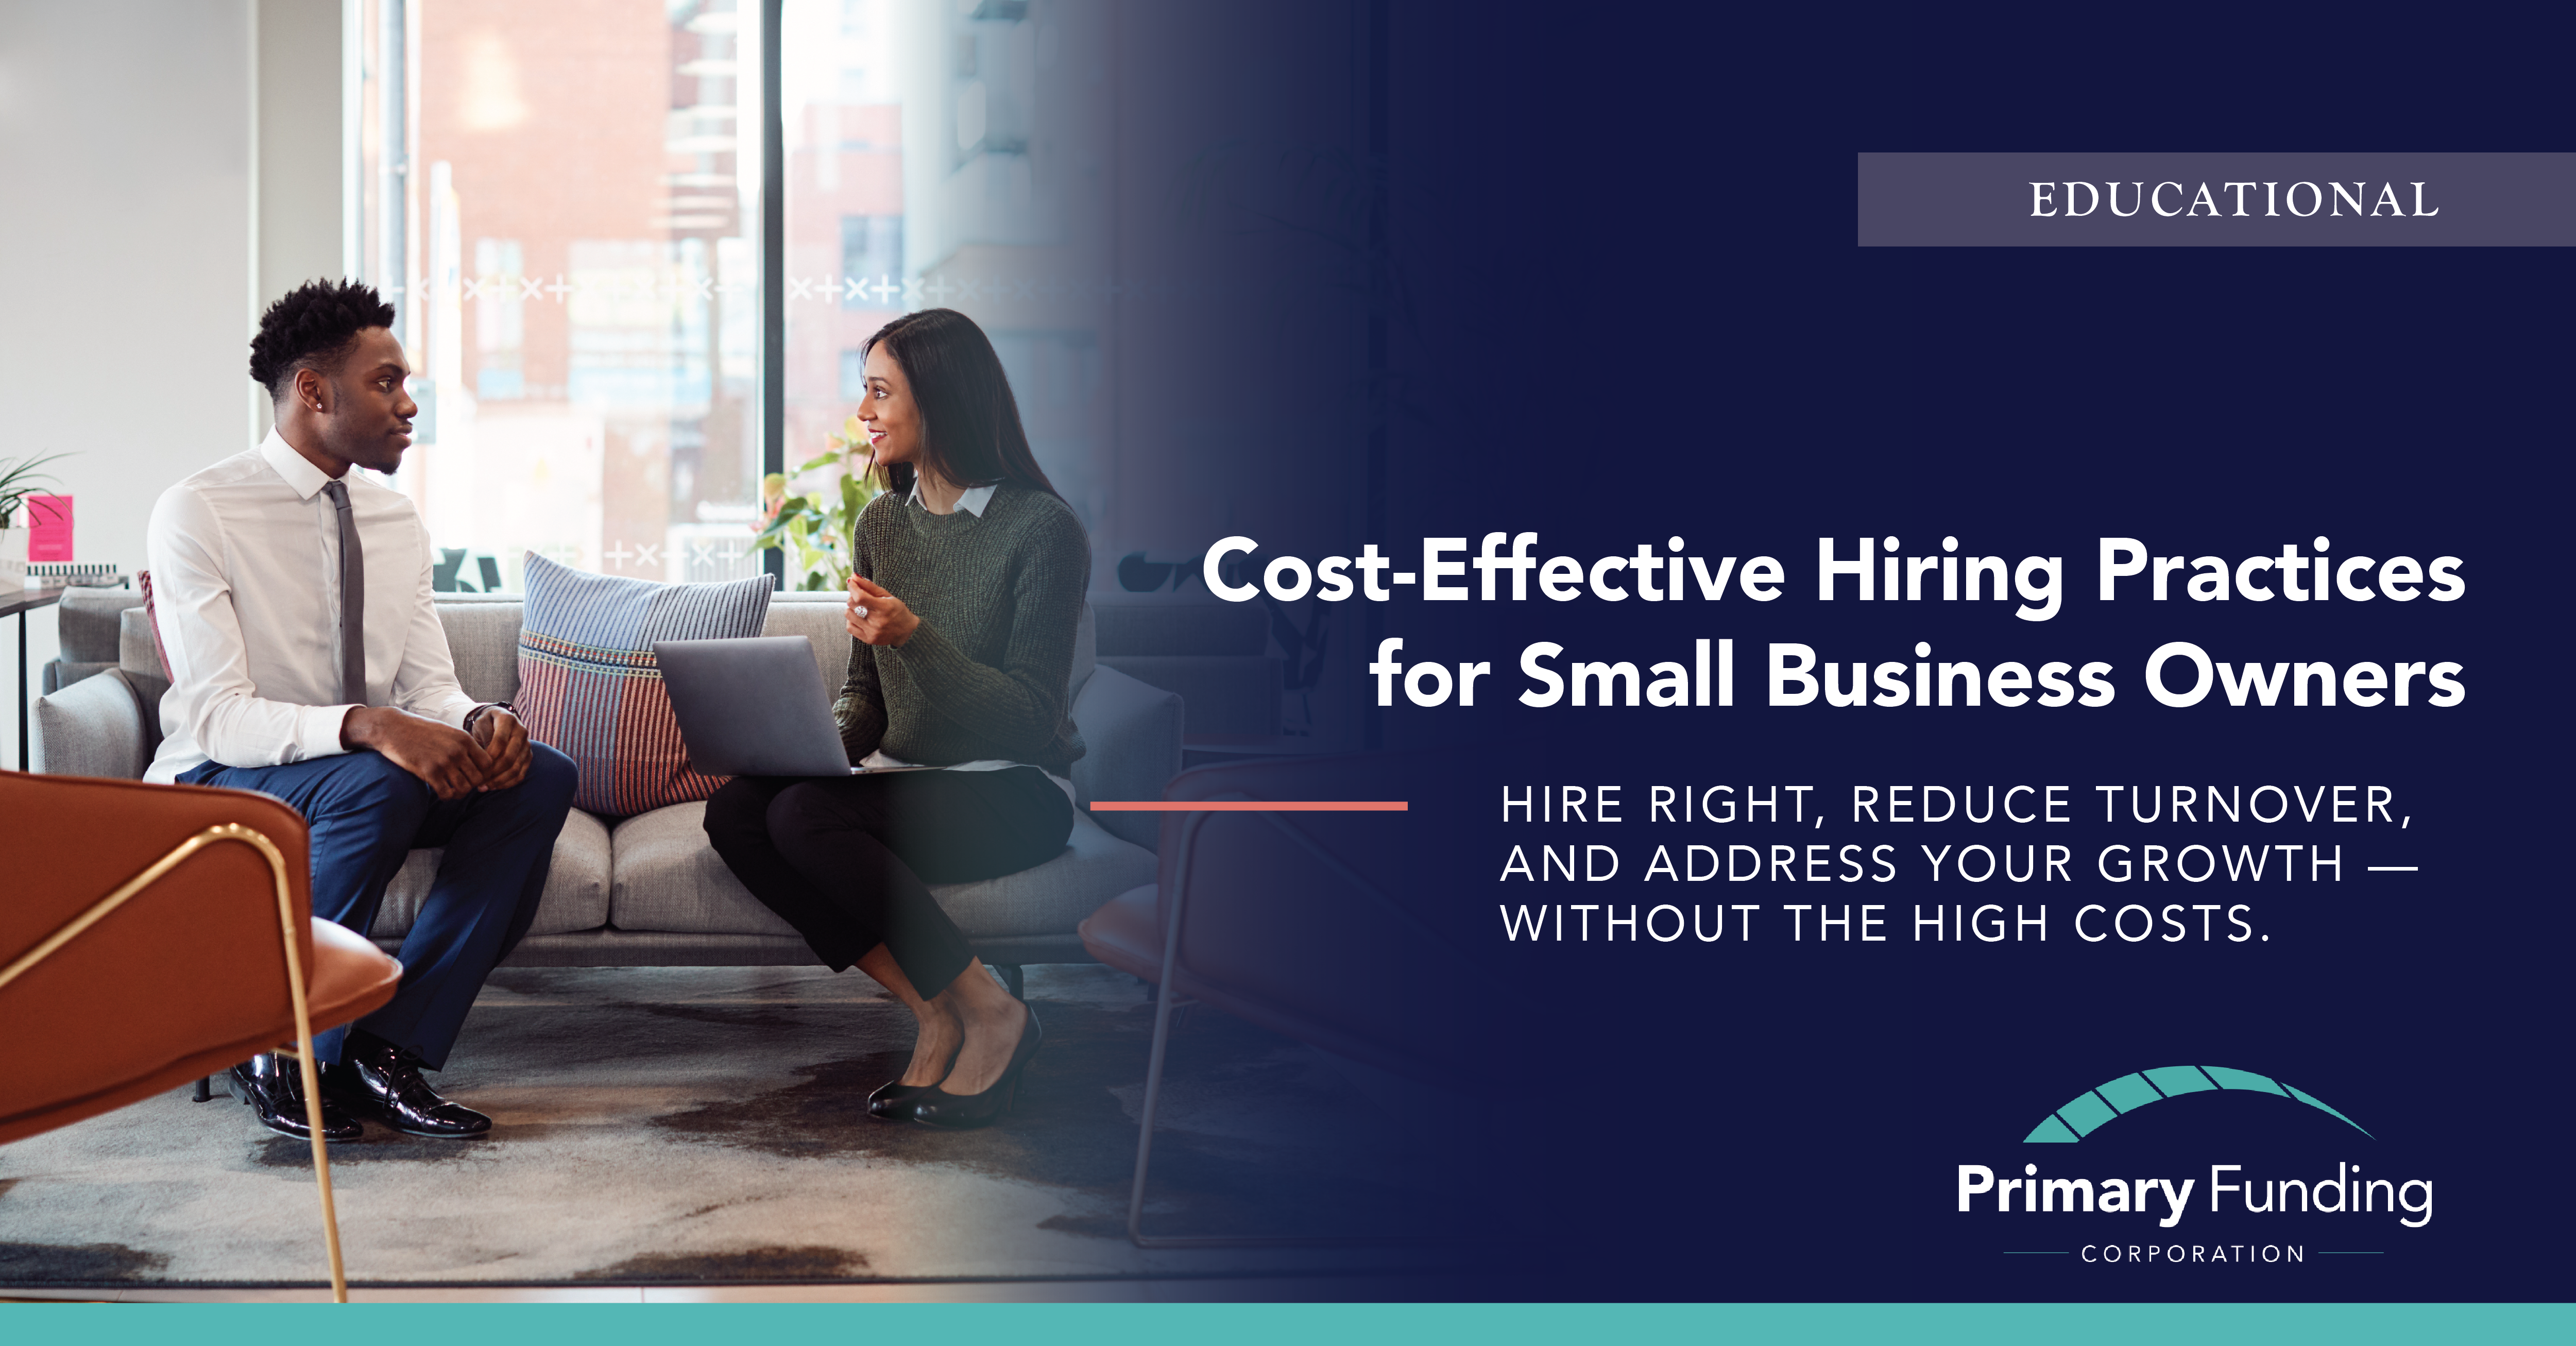 Cost-Effective Hiring Practices for Small Business Owners